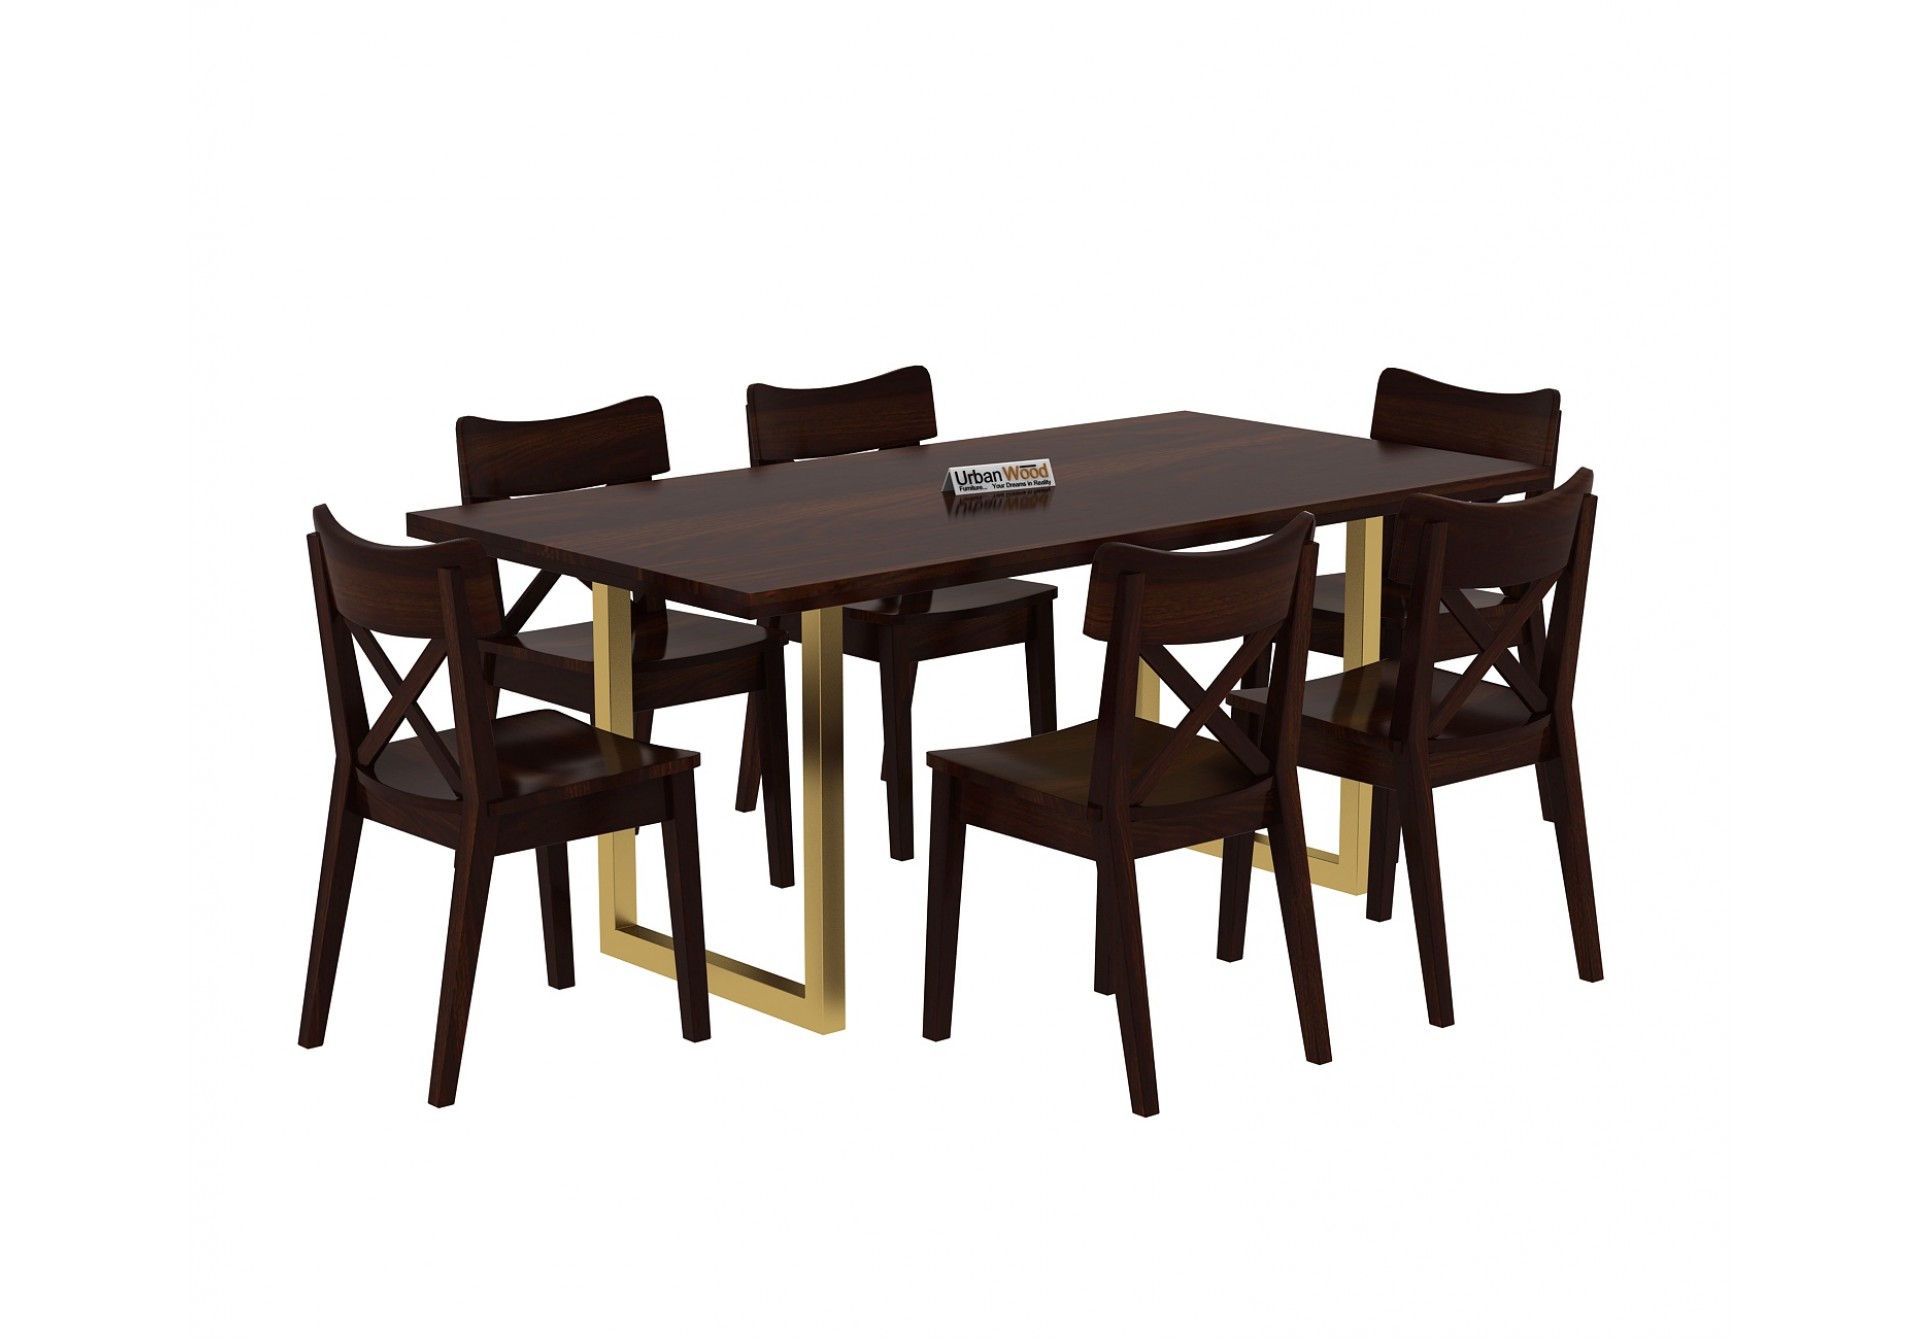 Tale 6-Seater Dining Table Set 